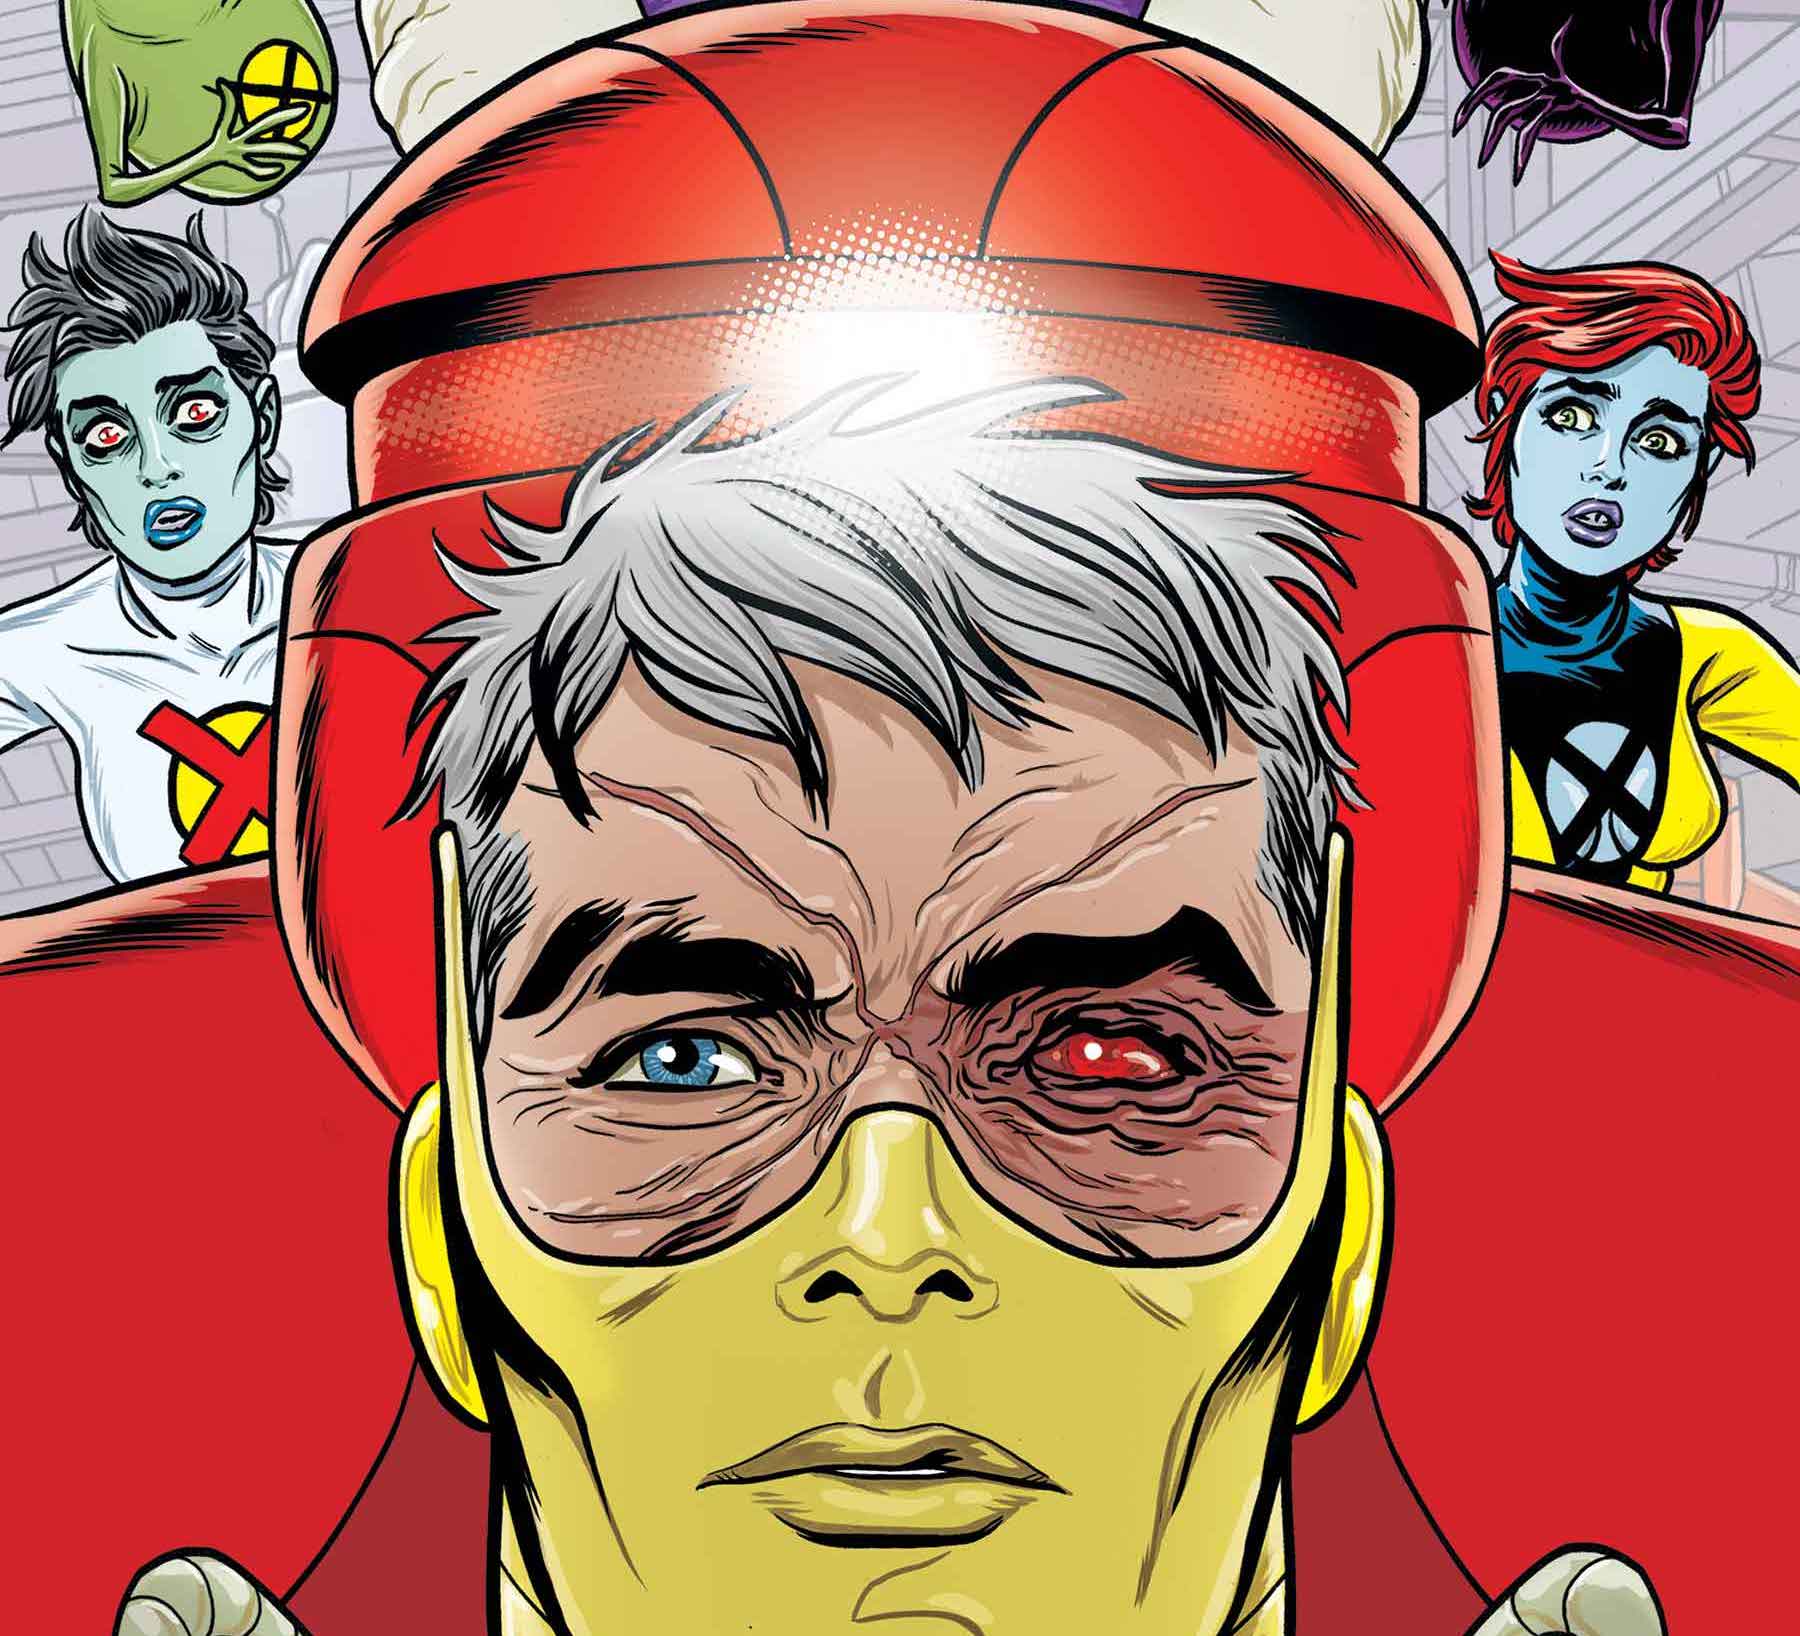 X-Statix returns in March 2023 with 'The X-Cellent' #1